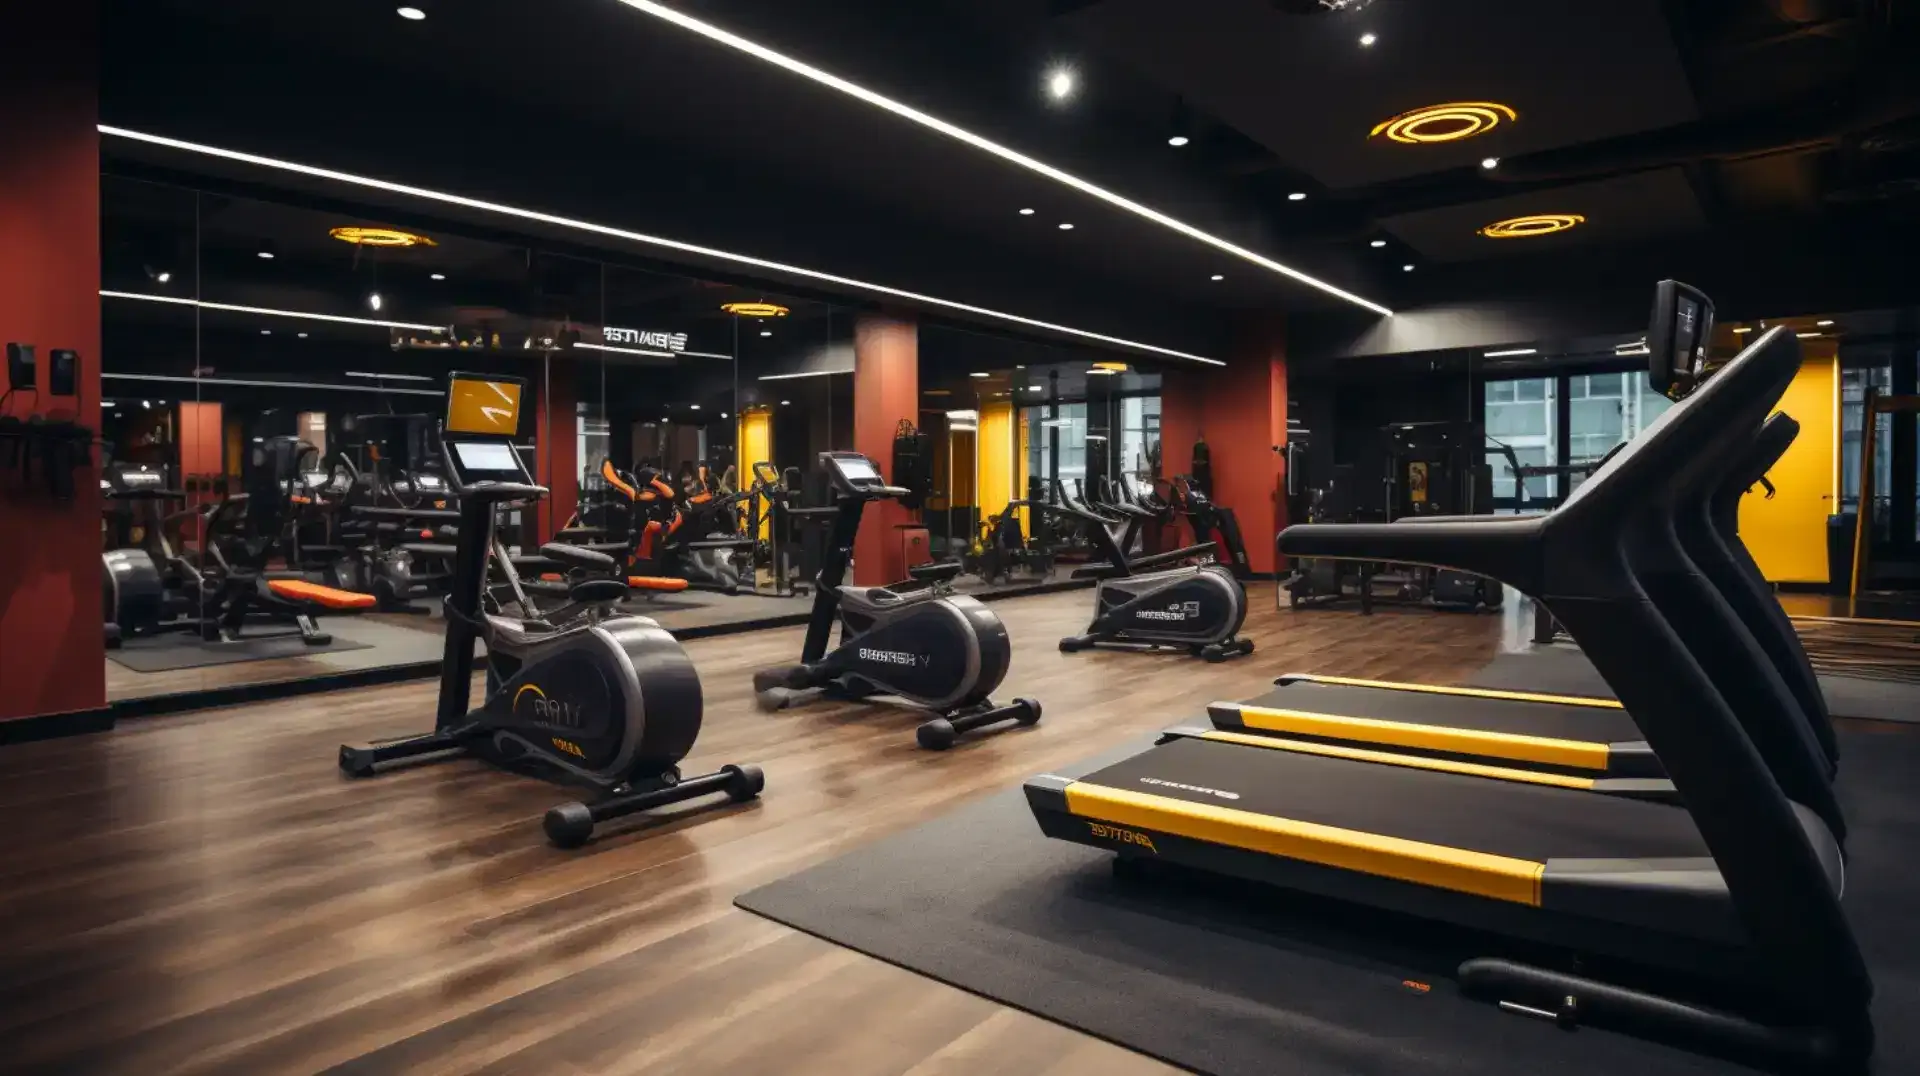 Fitness Studios in Mirdif: Energize Your Fitness Journey 